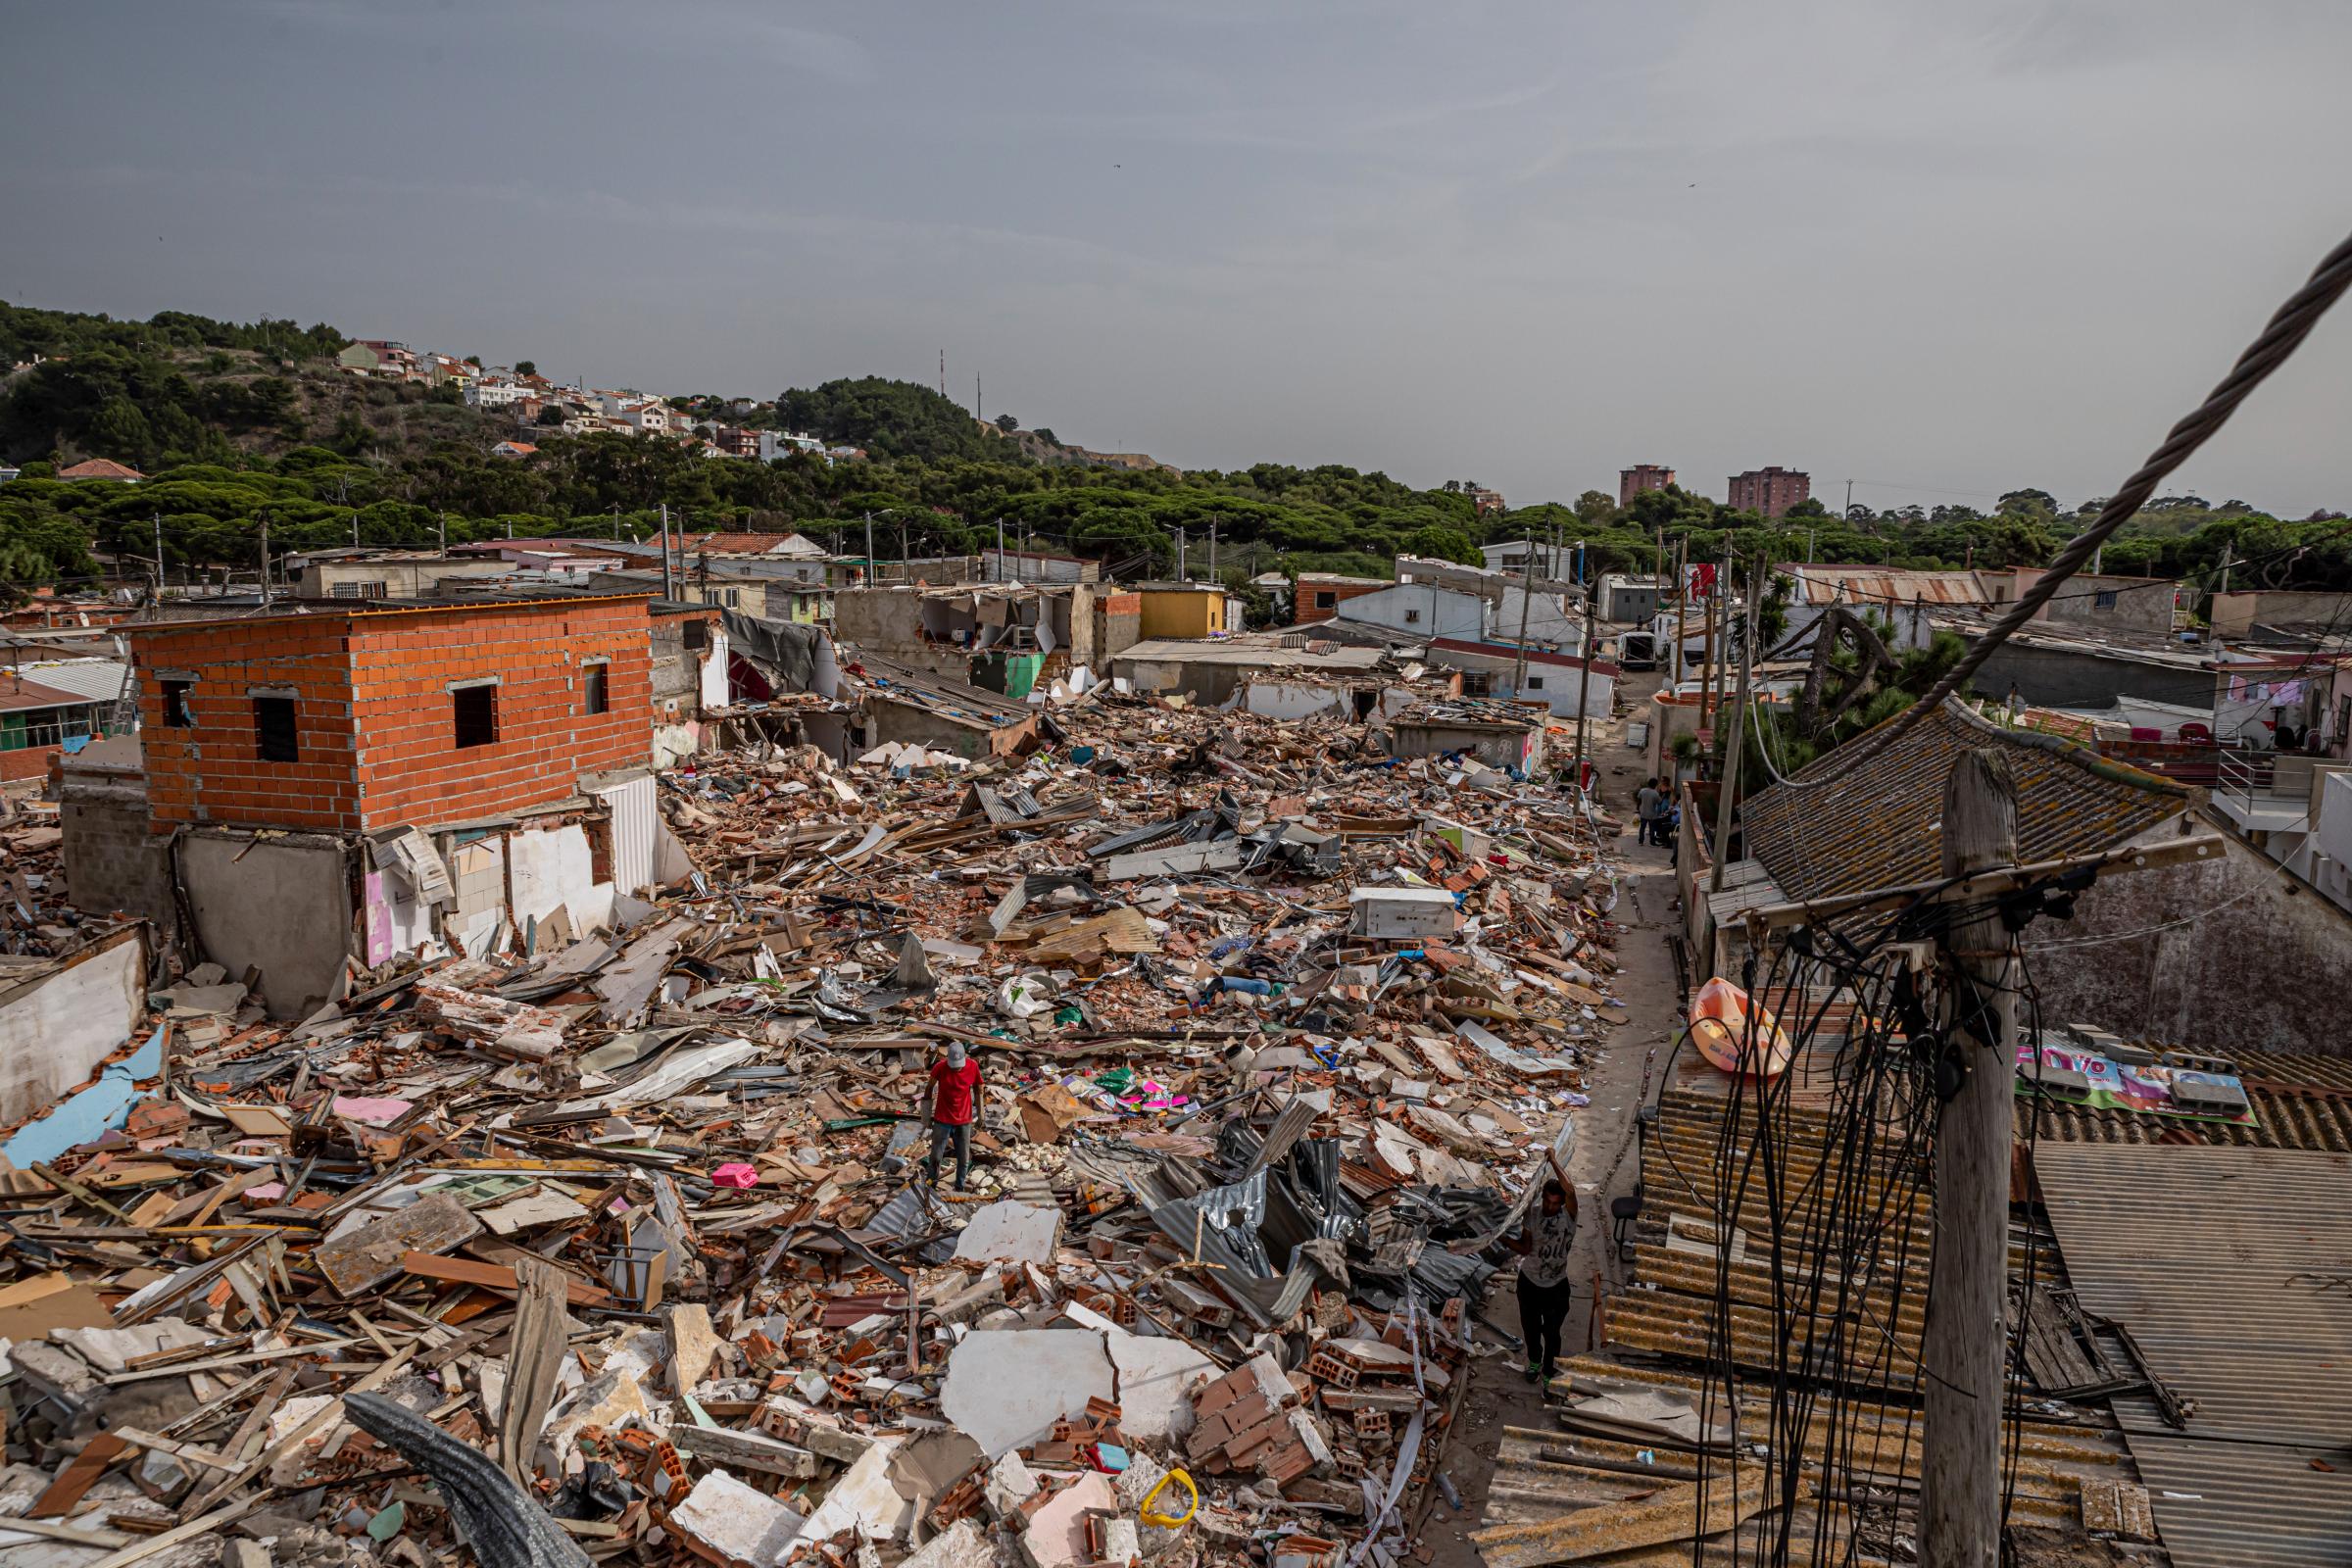 The Aftermath 2º Torrão - The debris was left for weeks on end, leading to the...